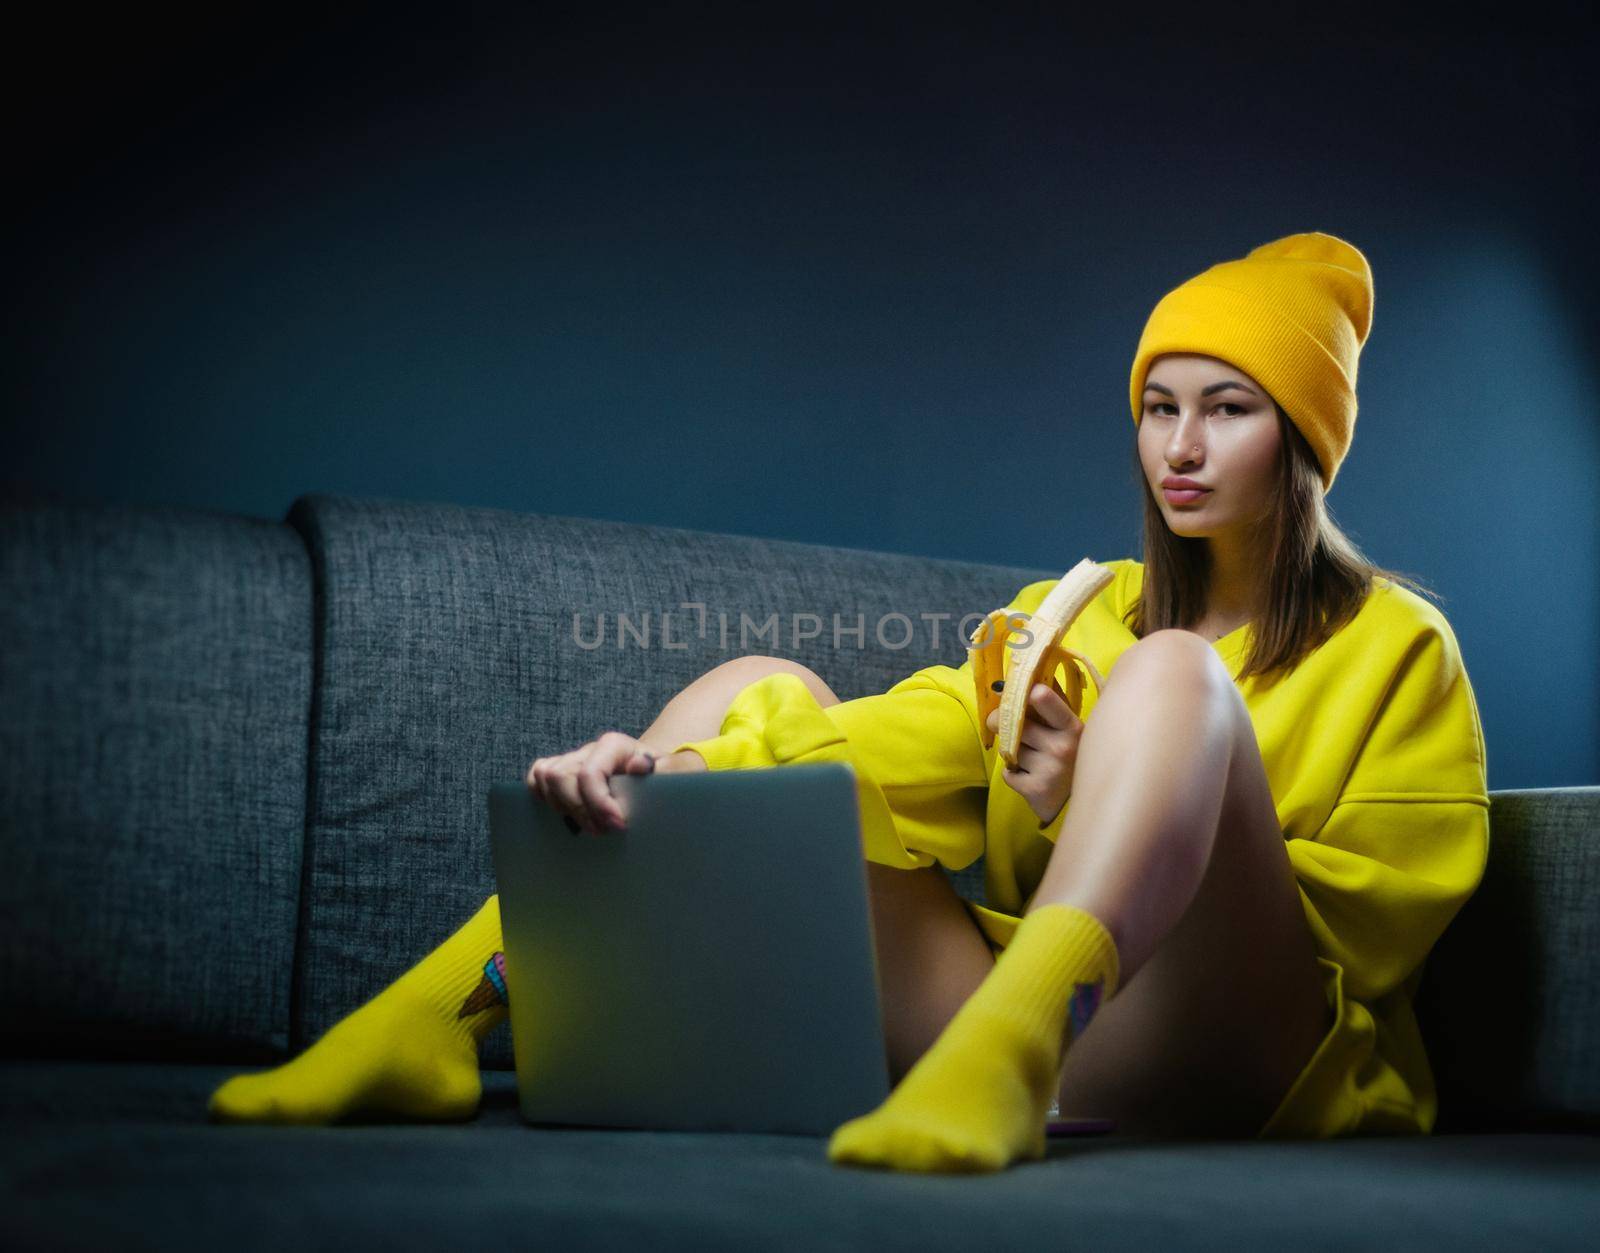 the woman on sofa with laptop eating sexy banana